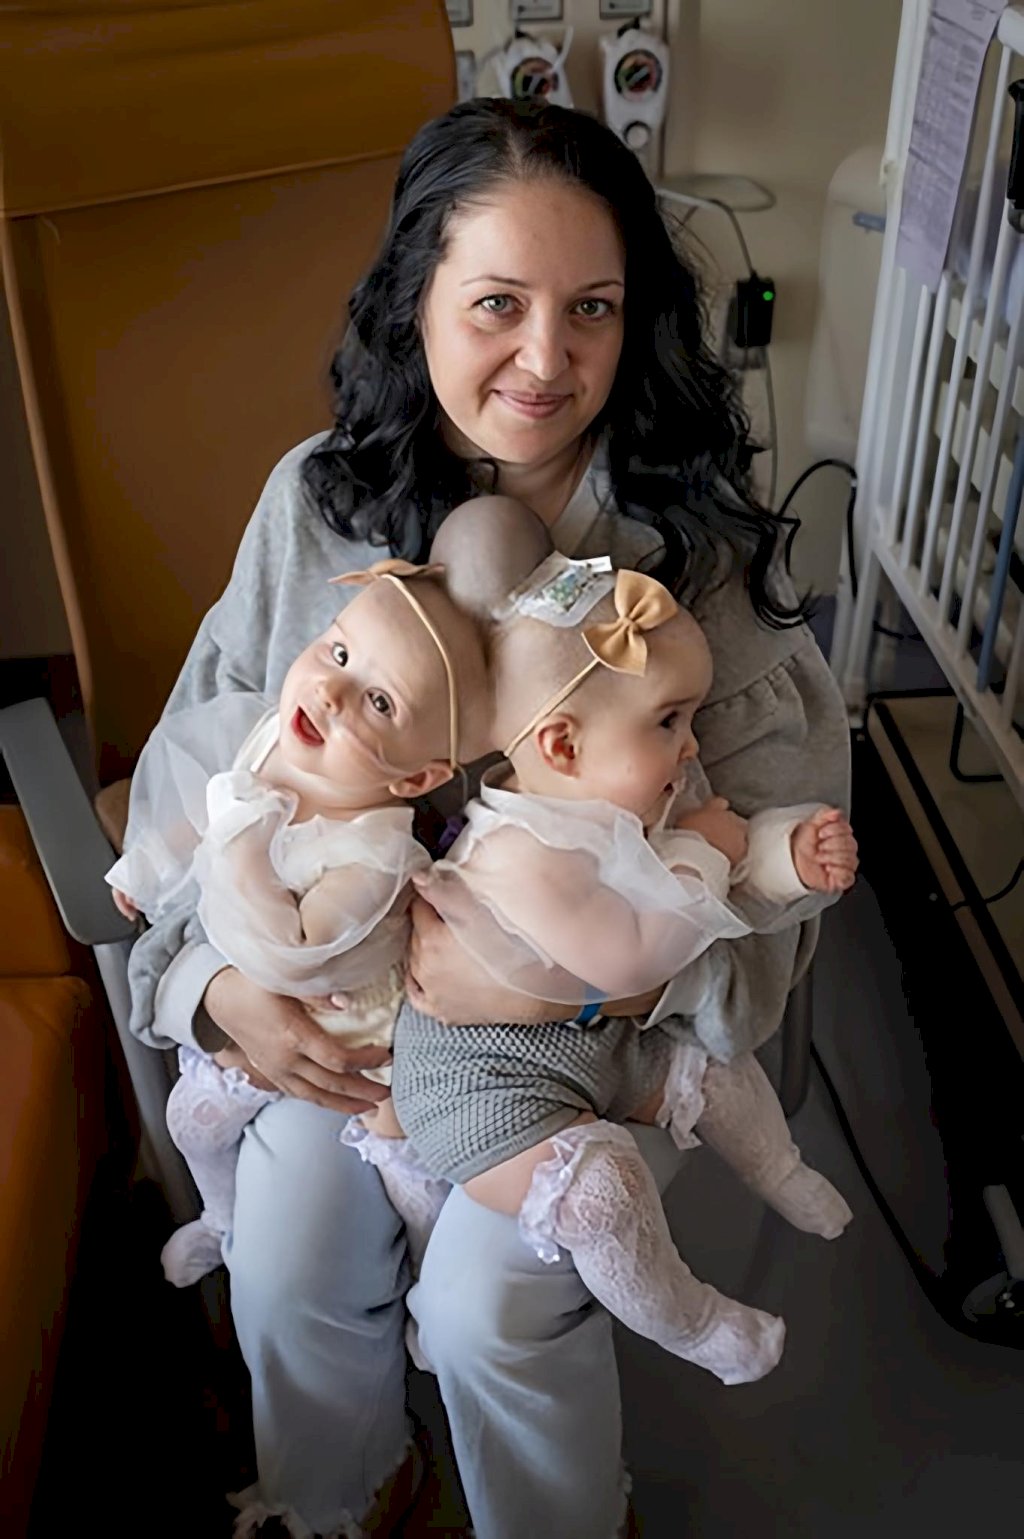 boundless hope: separating conjoined twins successfully. congrats baby